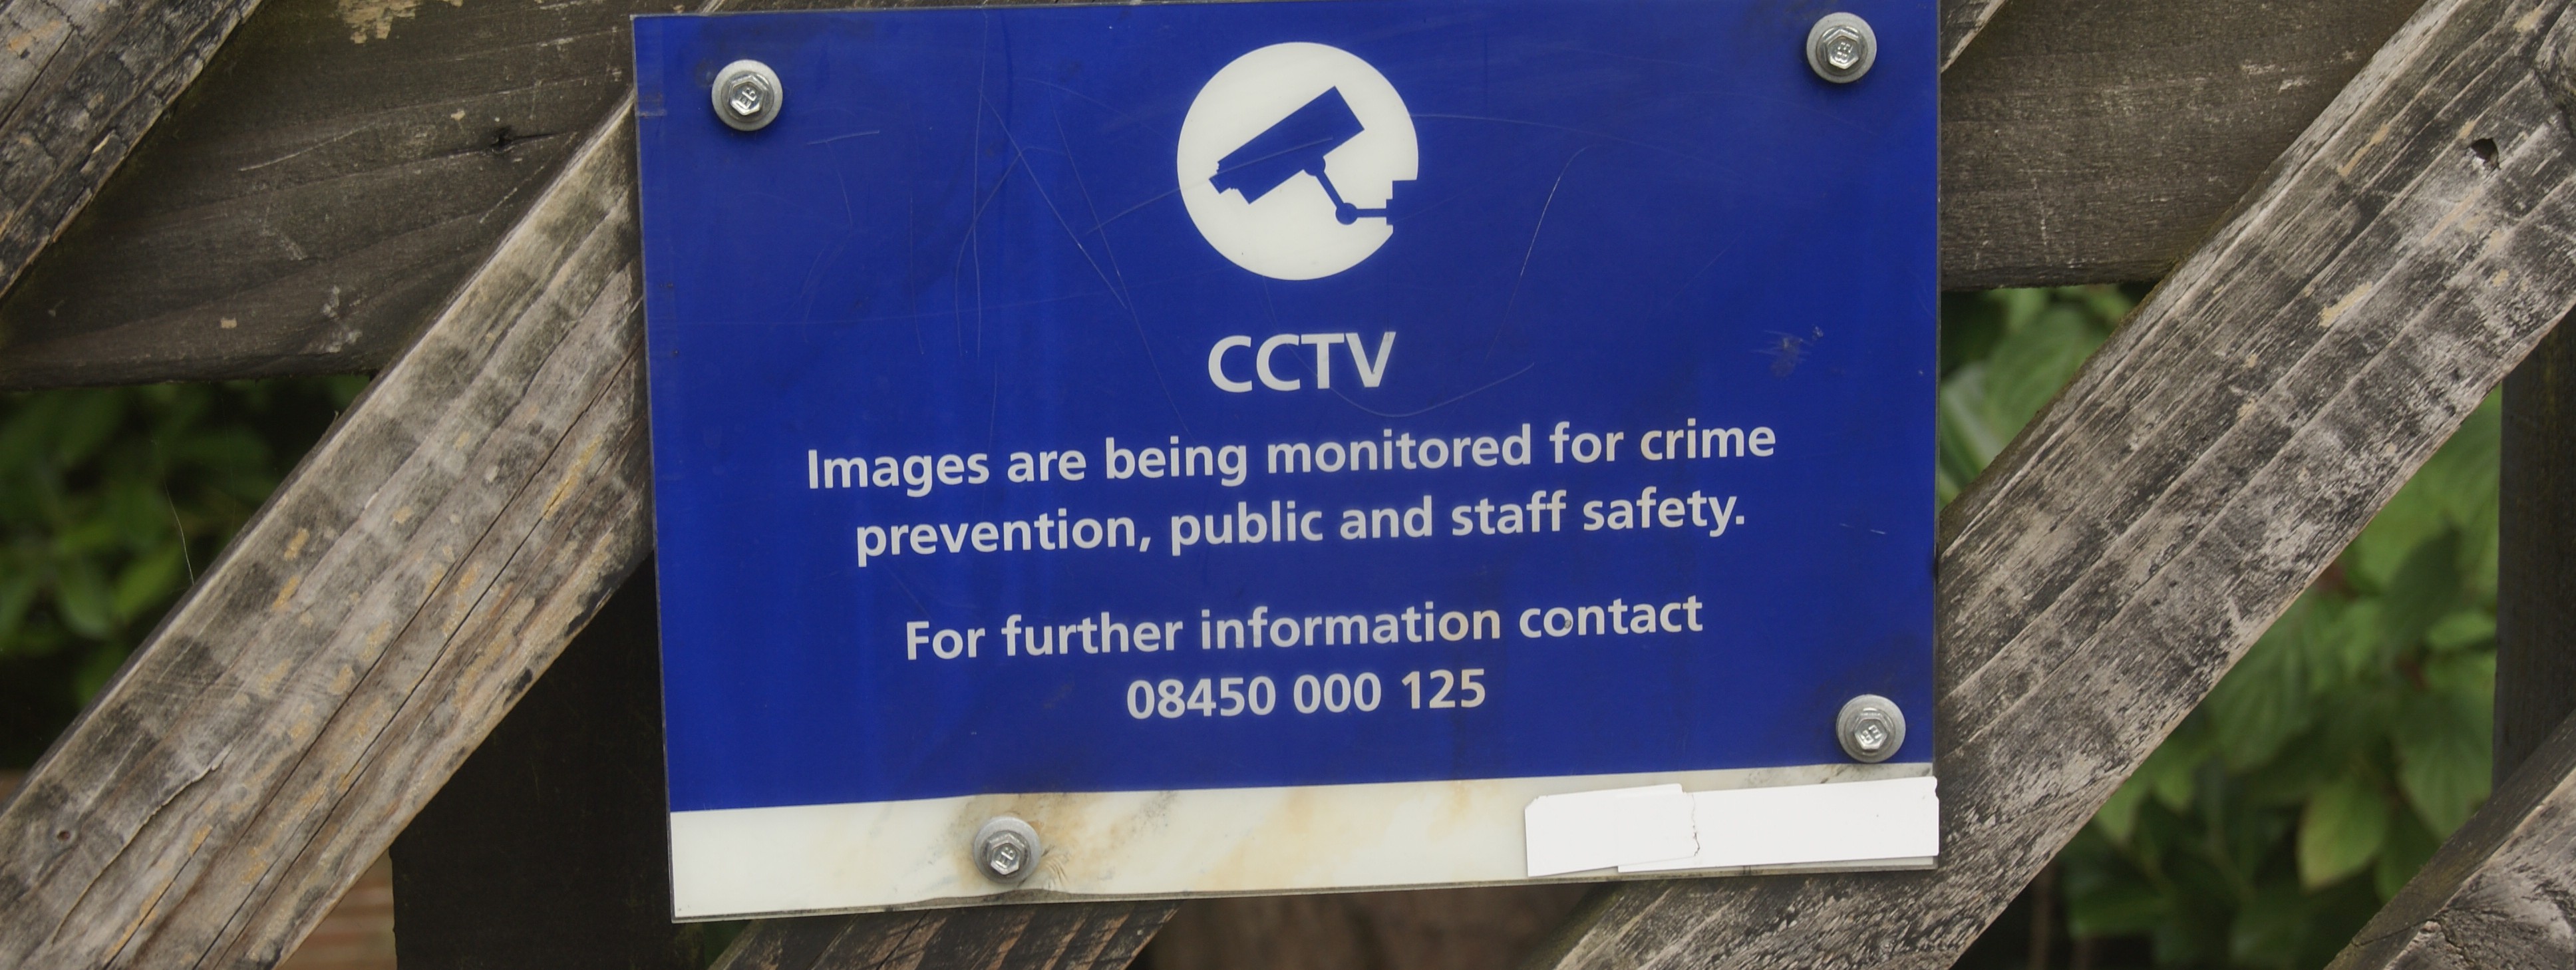 this-images-shows-a-sign-warning-that-images-are-being-recorded-for-safety